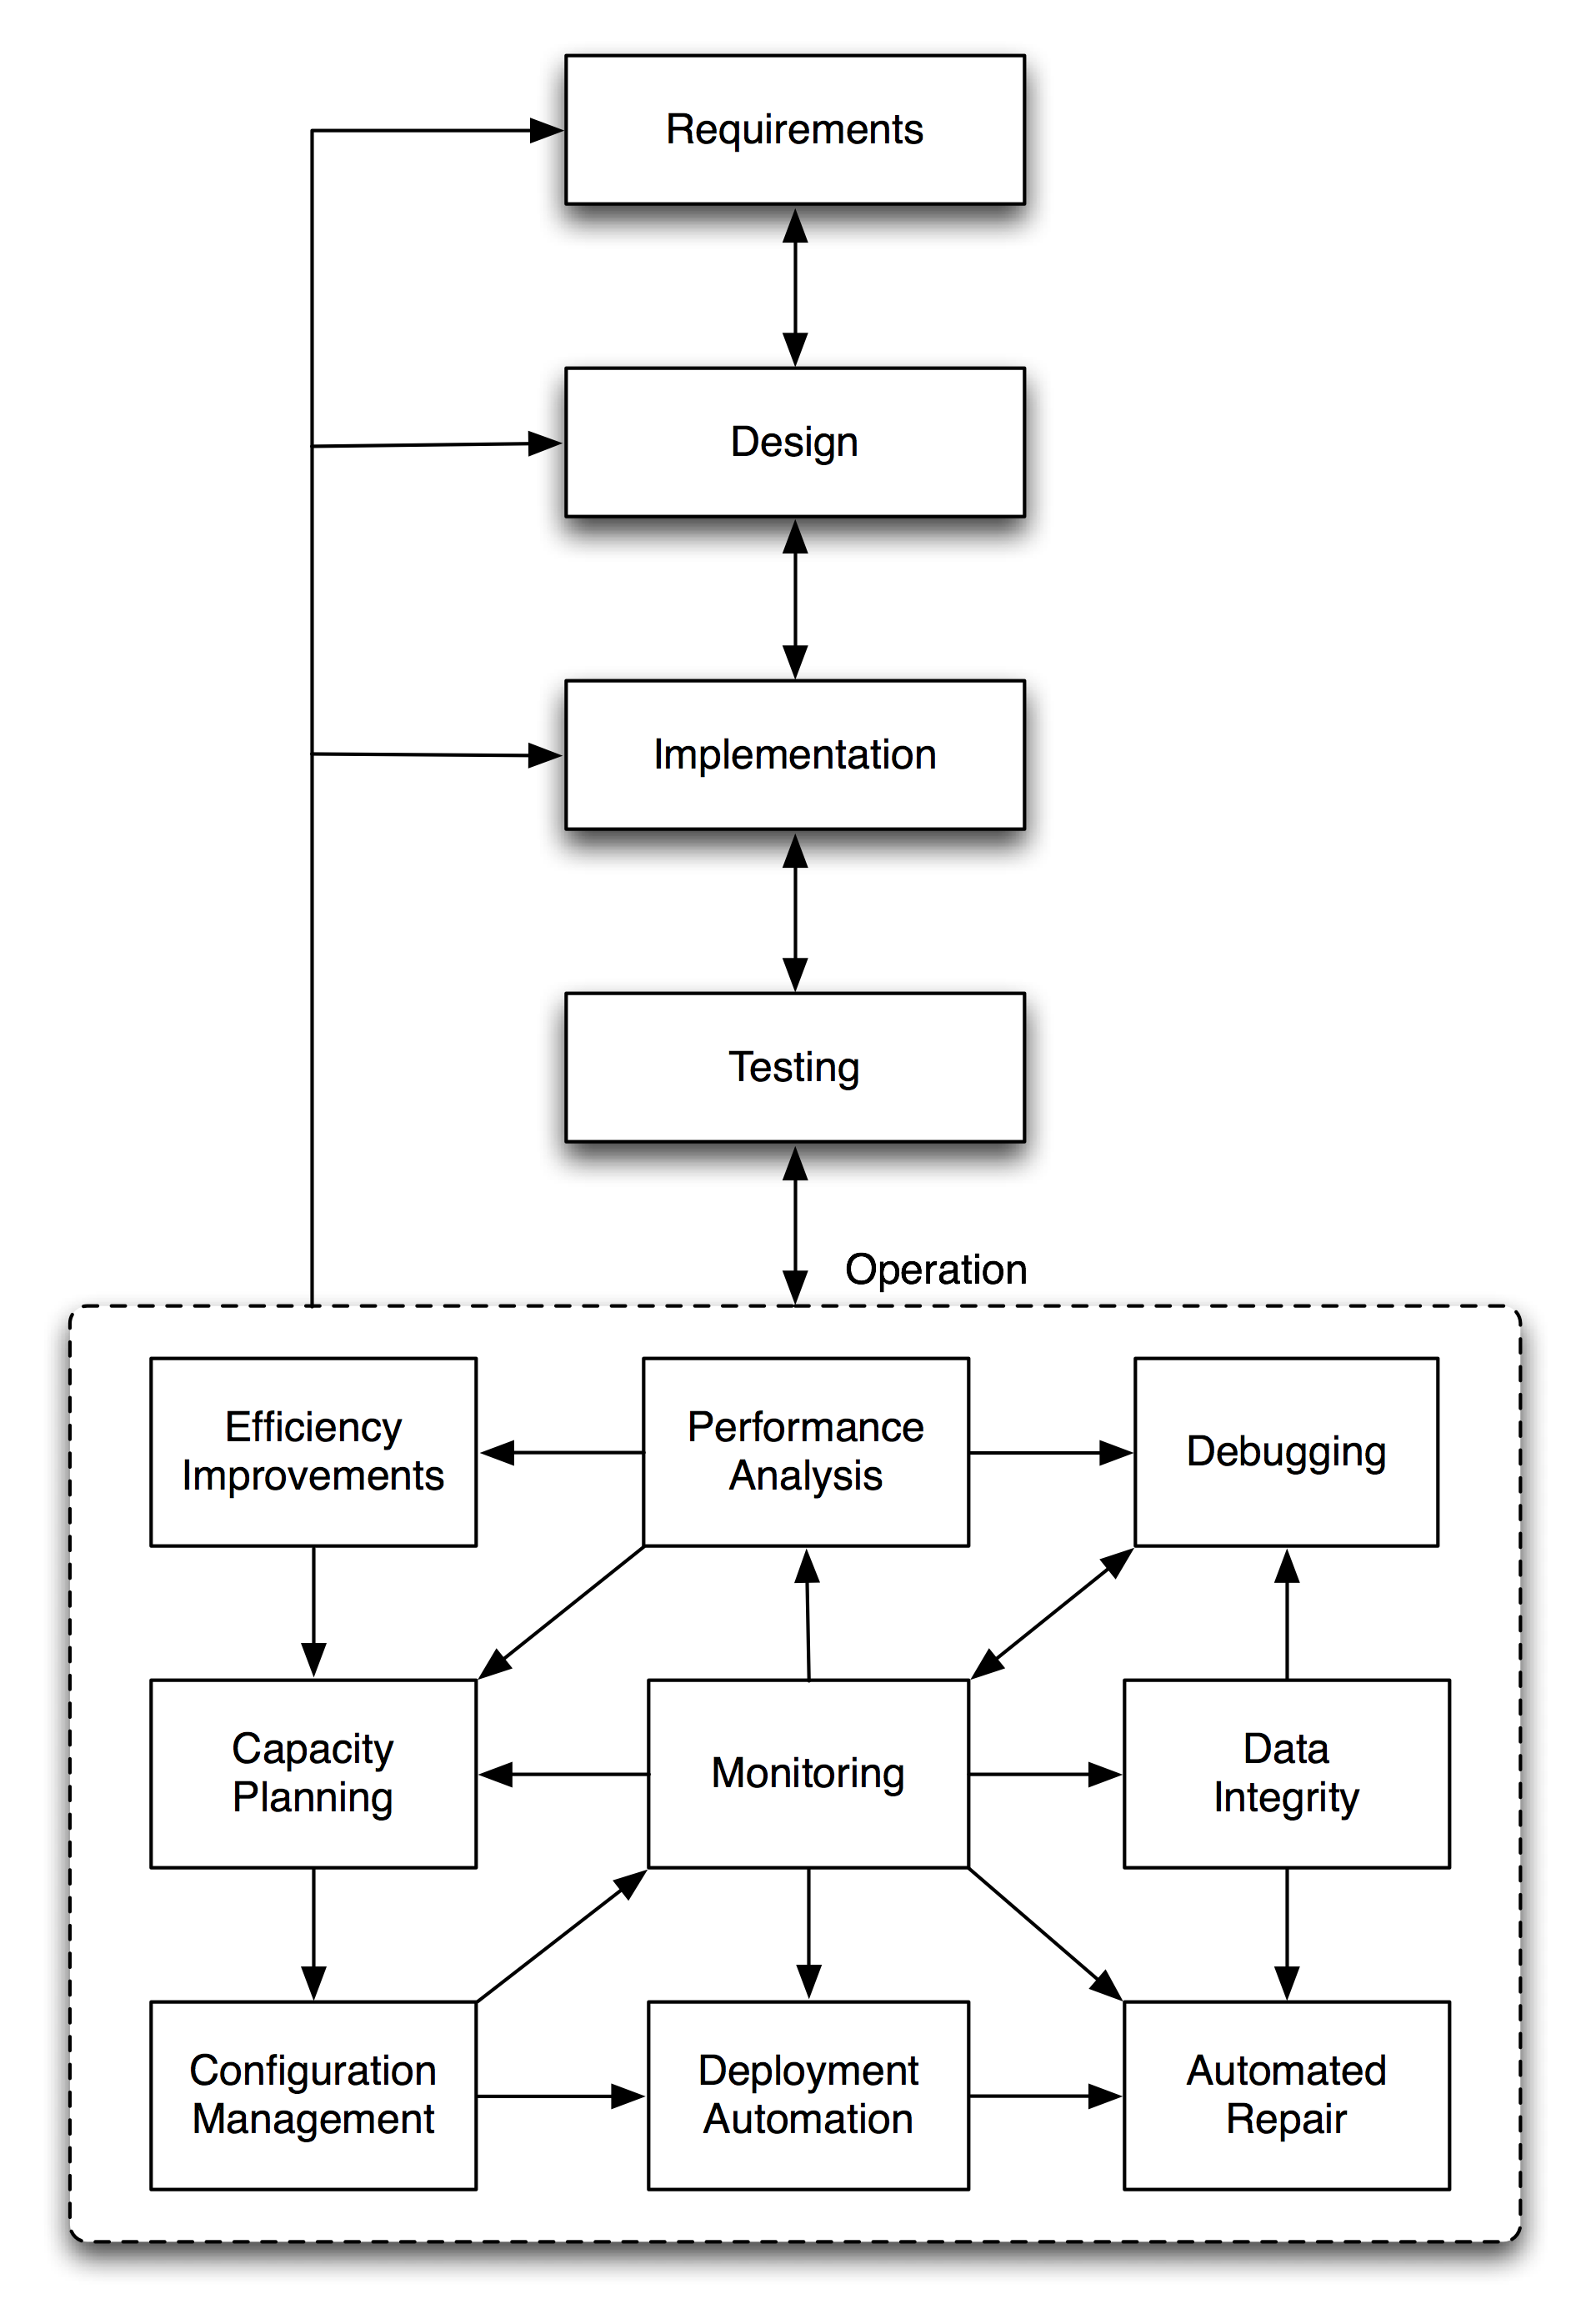 A software lifecycle process diagram making it clear how important the operations part is.